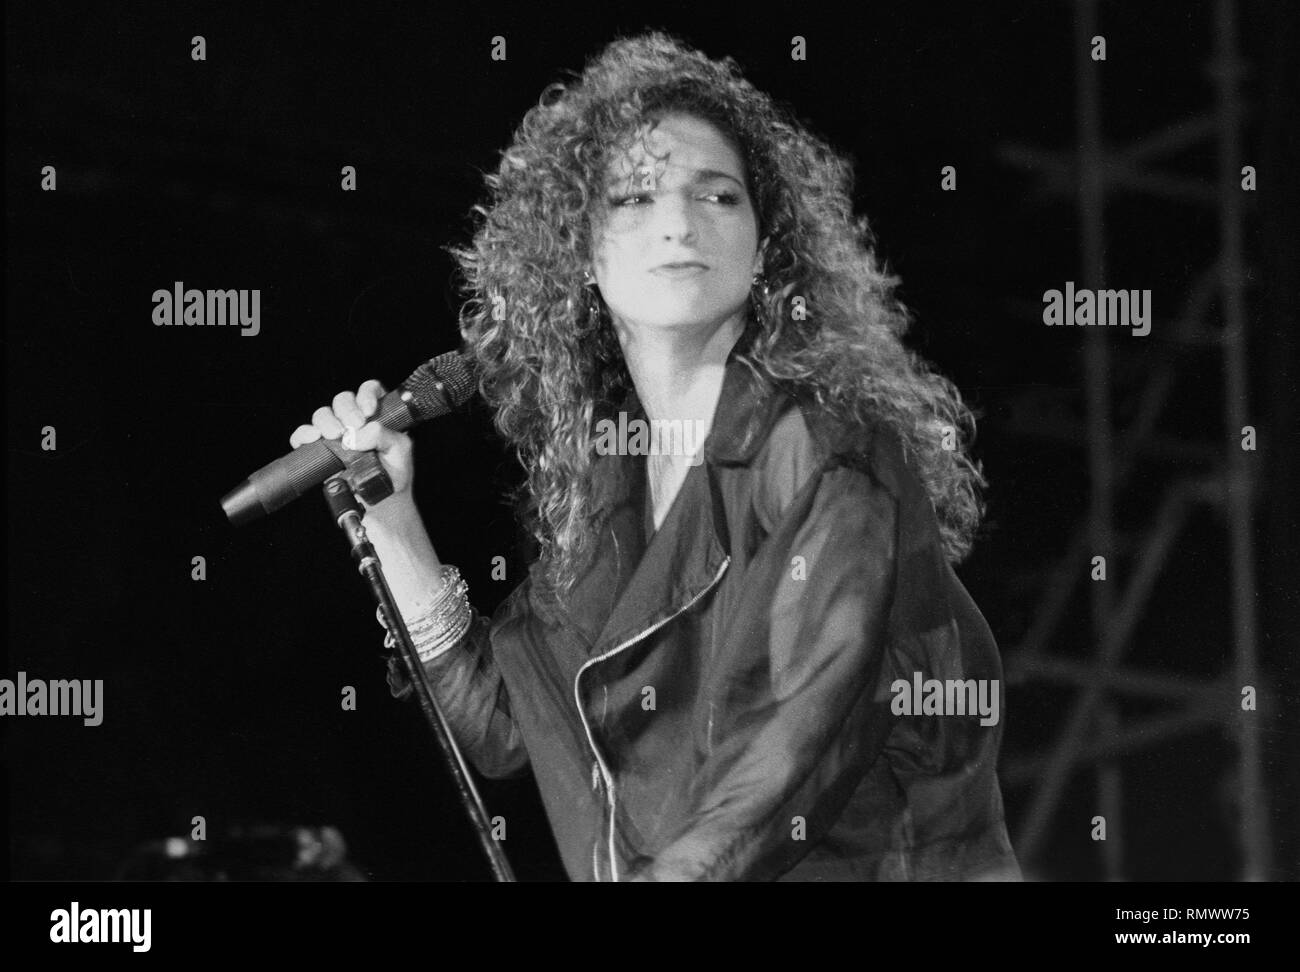 Singer and songwriter Gloria Estefan is shown performing on stage during a 'live' concert appearance. Stock Photo